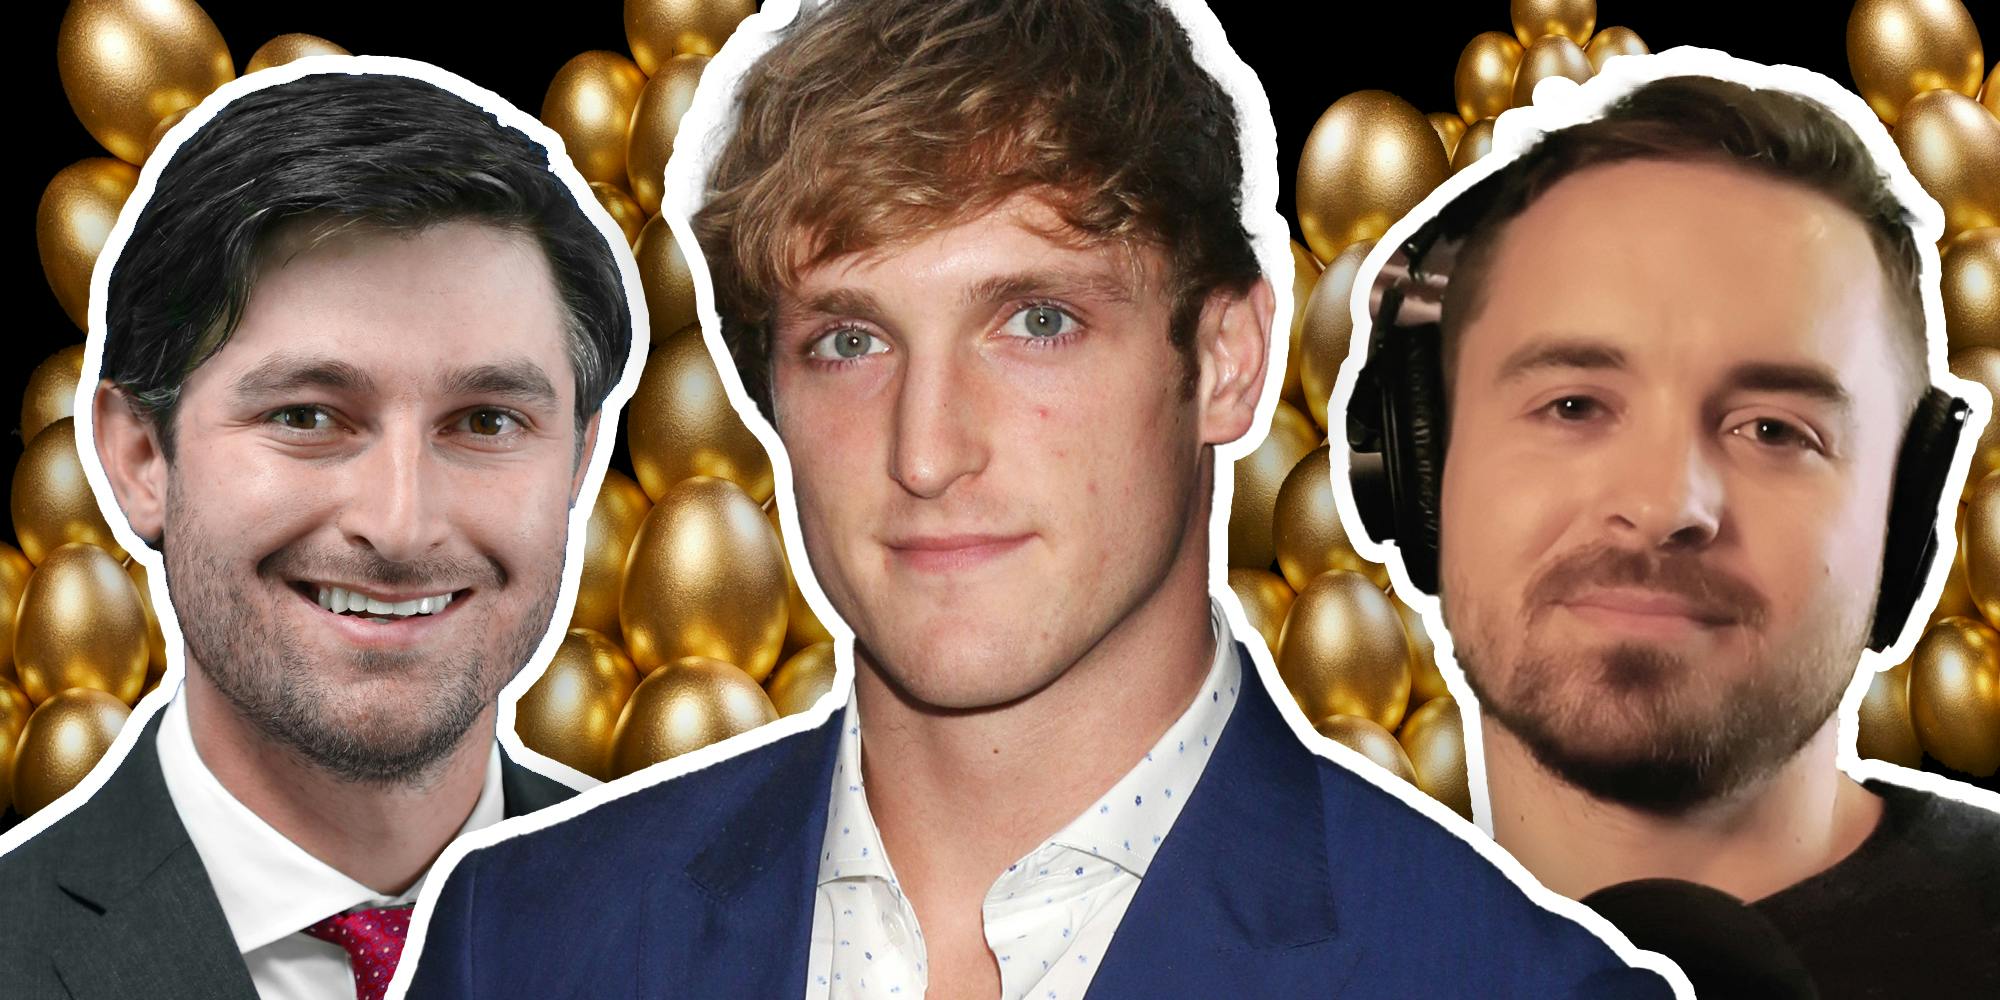 Attorney Tom, Logan Paul, and Coffeezilla in front of golden eggs